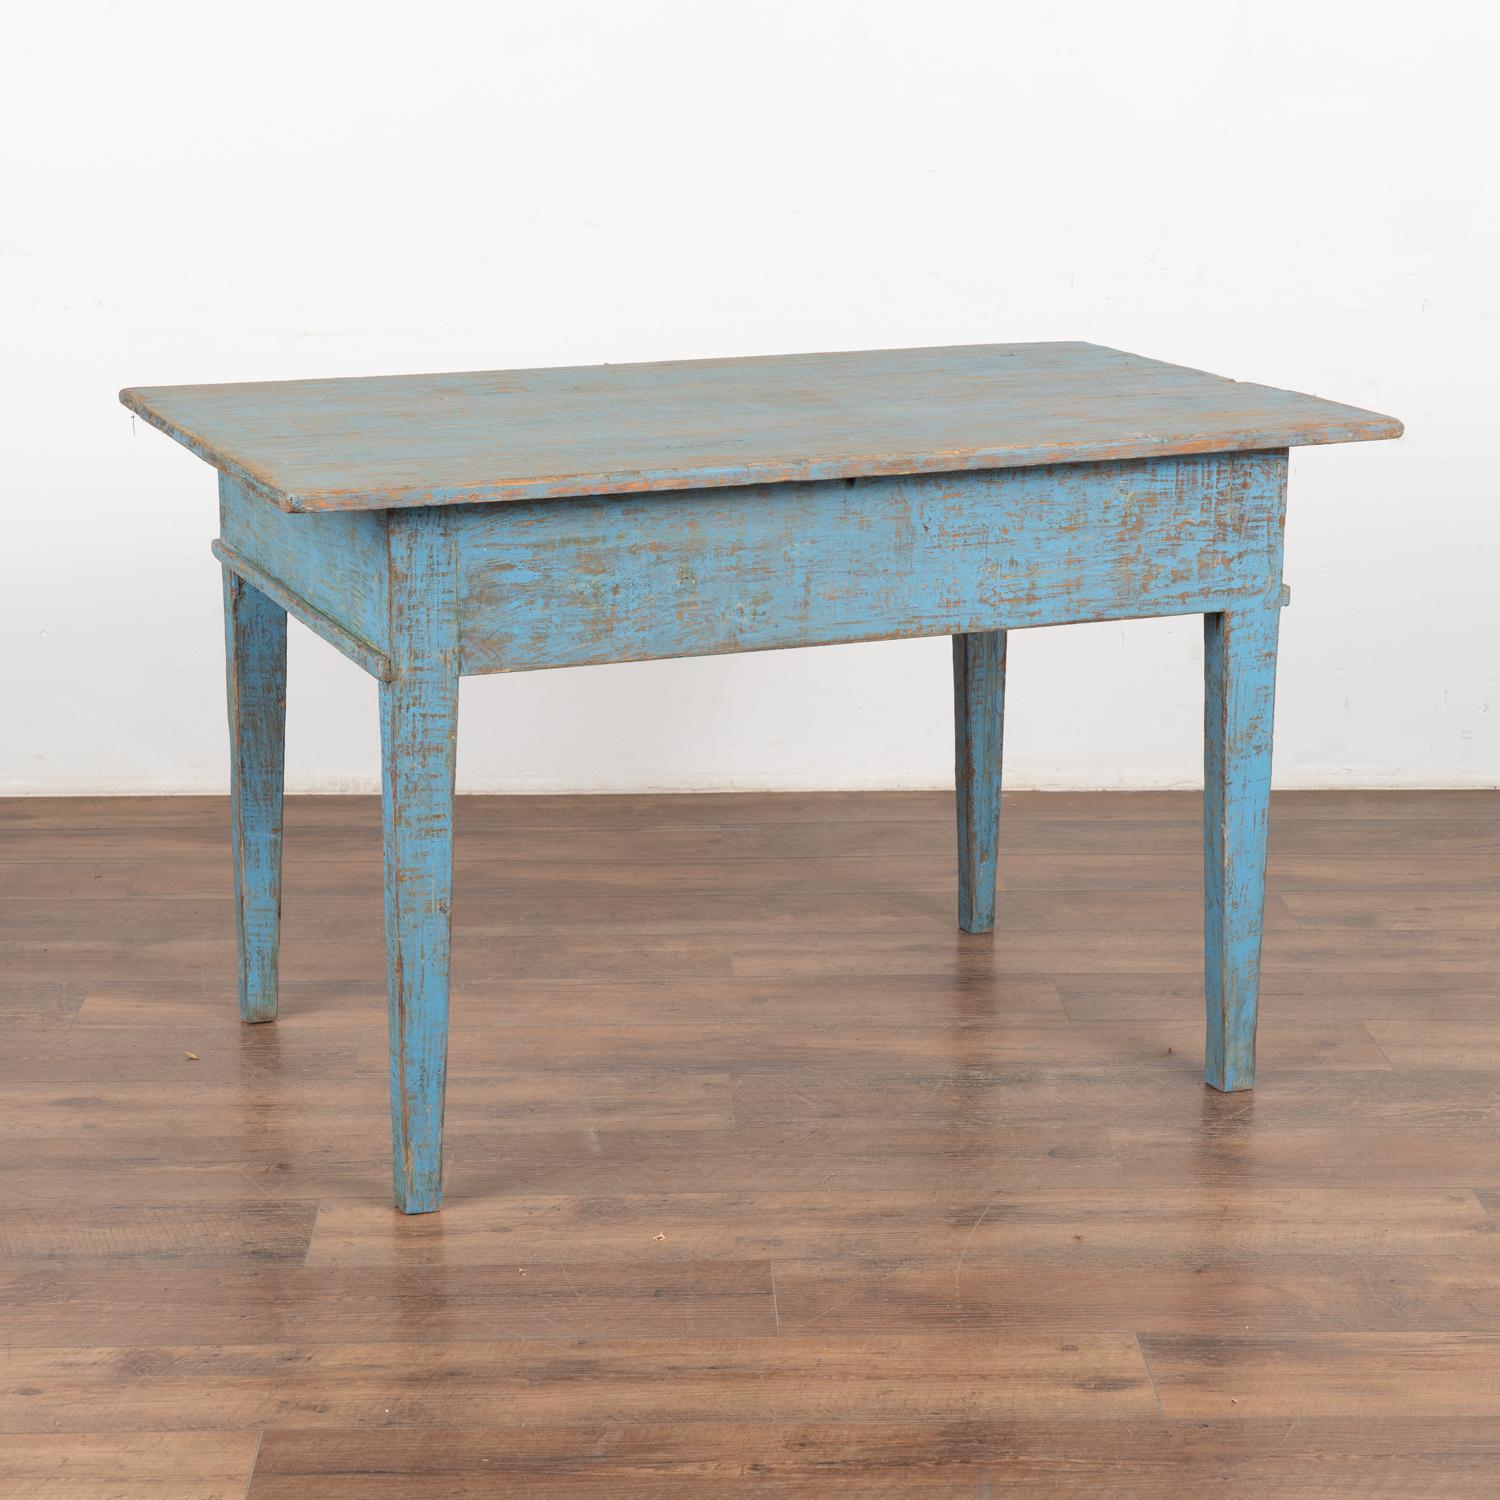 Blue Painted Pine Farm Table Writing Table With 2 Drawers, Sweden circa 1860-80 For Sale 3